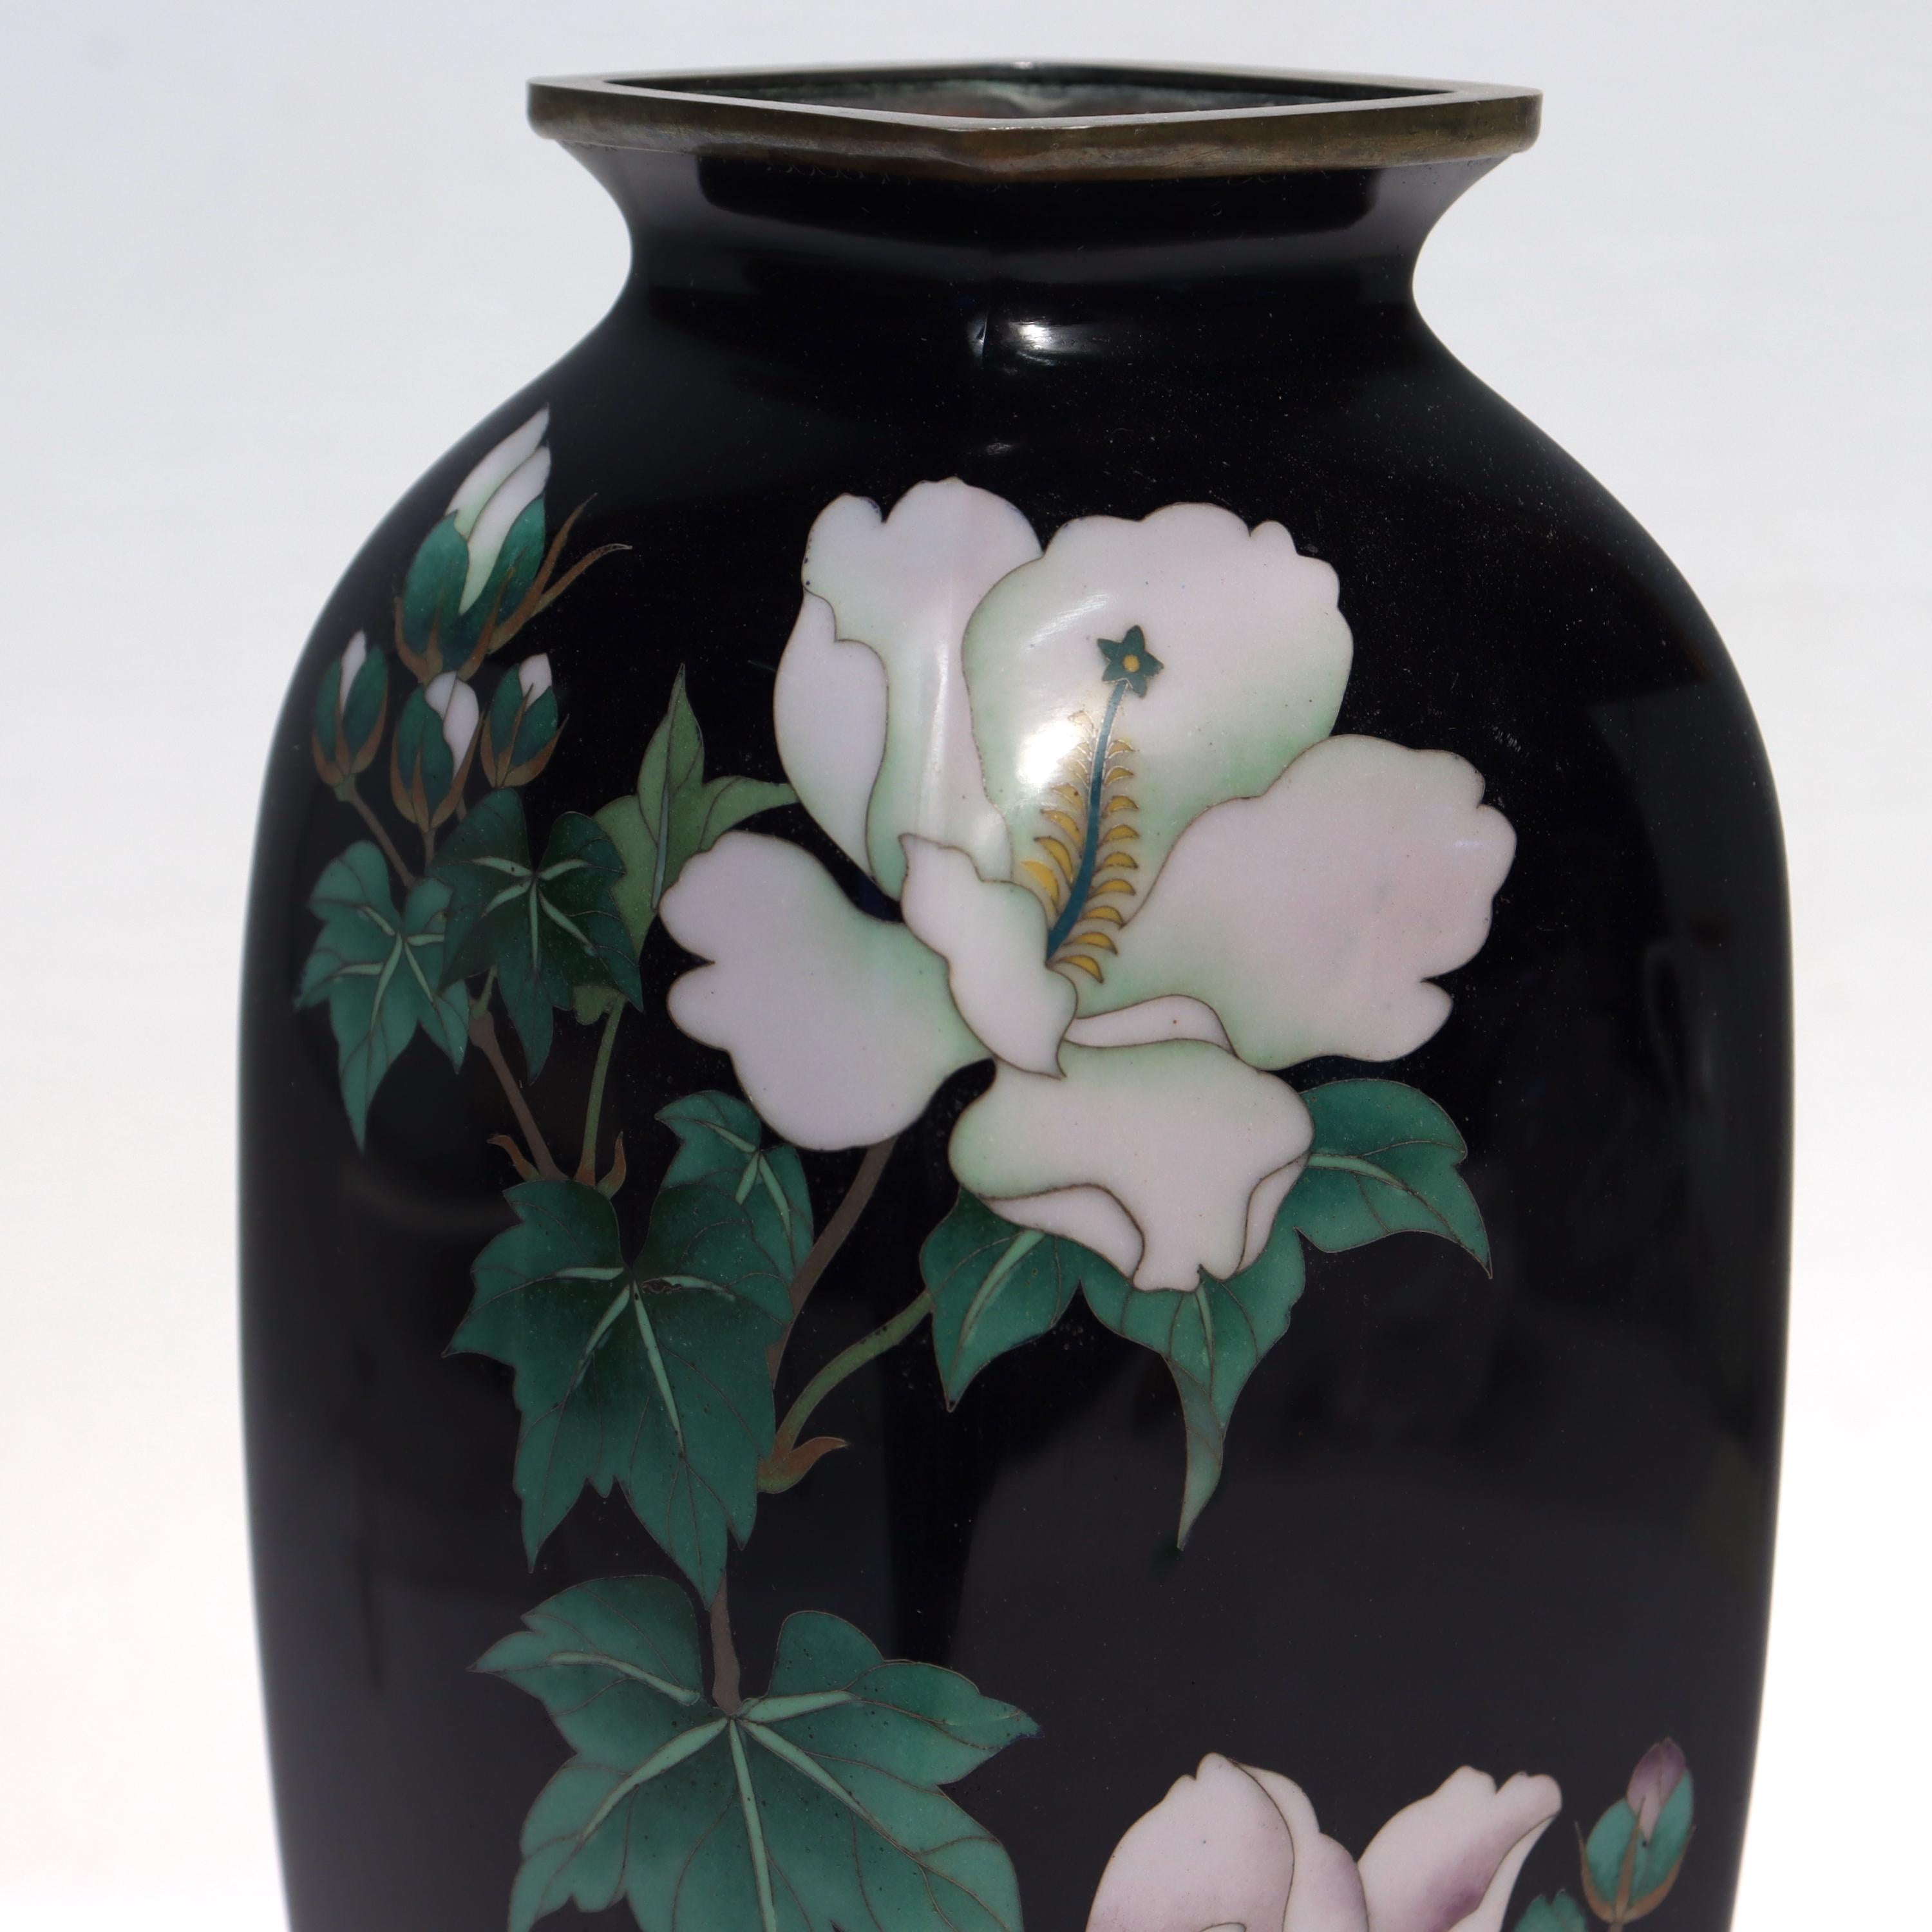 Cloissoné Old or Antique Japanese Wired Cloisonne Enamel Vase with White Flowers